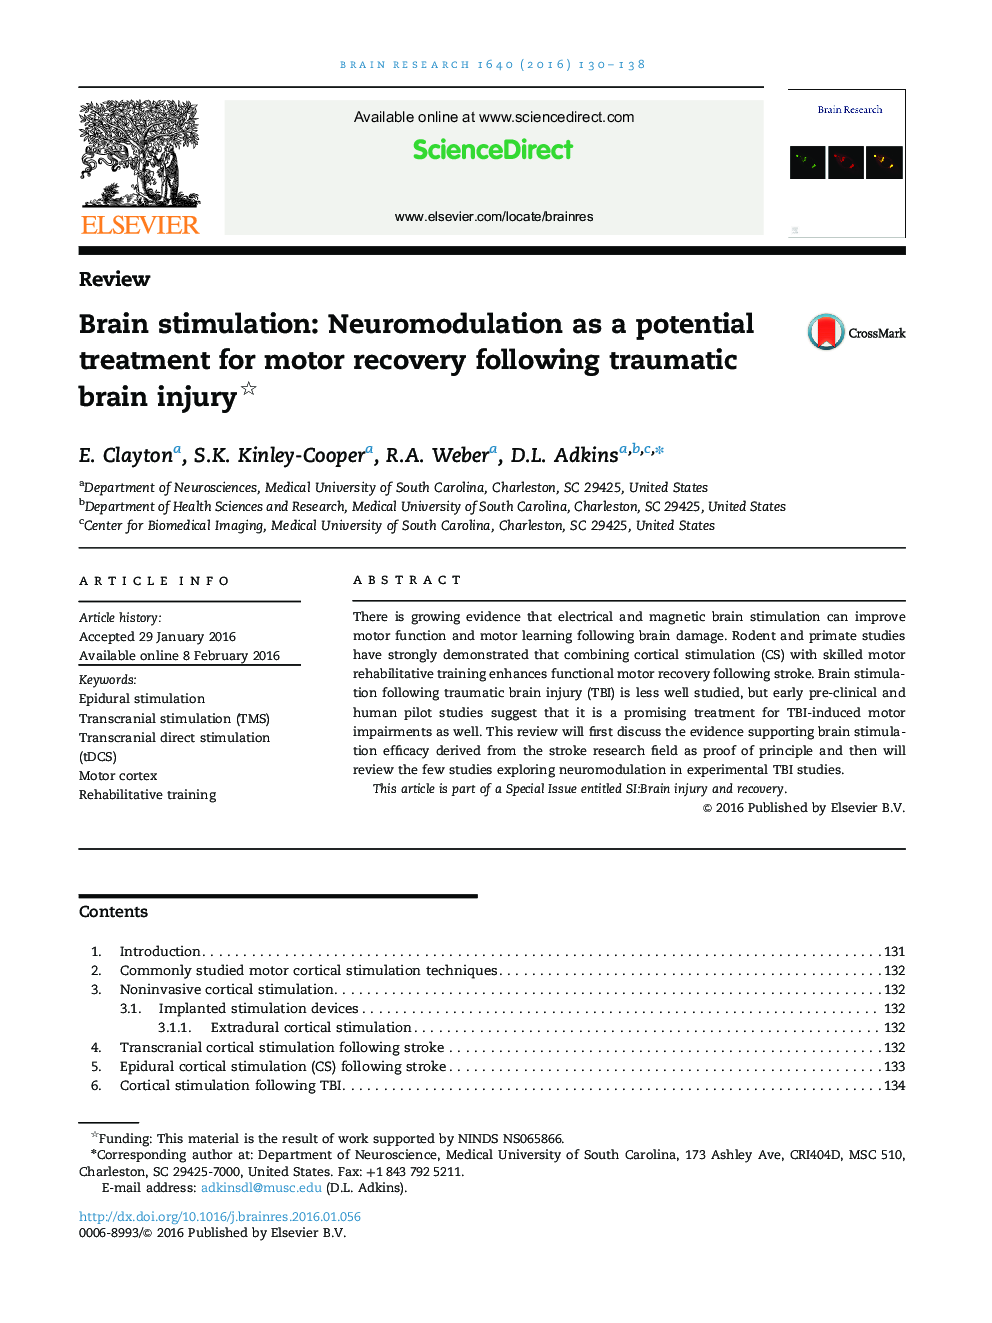 Brain stimulation: Neuromodulation as a potential treatment for motor recovery following traumatic brain injury 